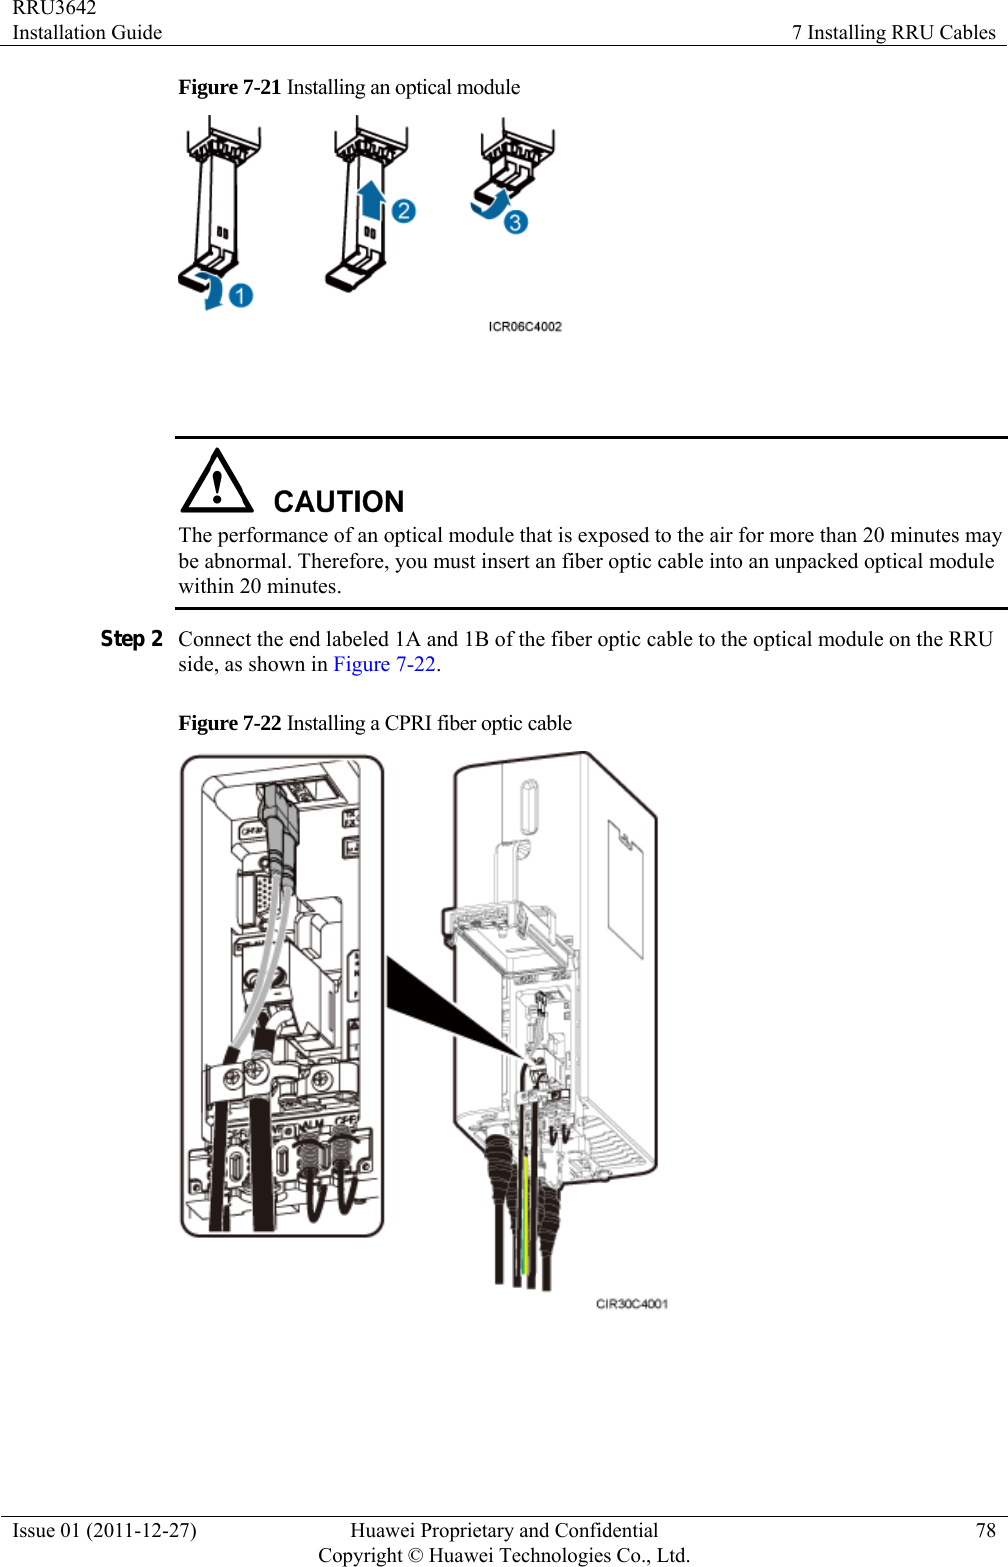 RRU3642 Installation Guide  7 Installing RRU Cables Issue 01 (2011-12-27)  Huawei Proprietary and Confidential         Copyright © Huawei Technologies Co., Ltd.78 Figure 7-21 Installing an optical module     The performance of an optical module that is exposed to the air for more than 20 minutes may be abnormal. Therefore, you must insert an fiber optic cable into an unpacked optical module within 20 minutes. Step 2 Connect the end labeled 1A and 1B of the fiber optic cable to the optical module on the RRU side, as shown in Figure 7-22. Figure 7-22 Installing a CPRI fiber optic cable    